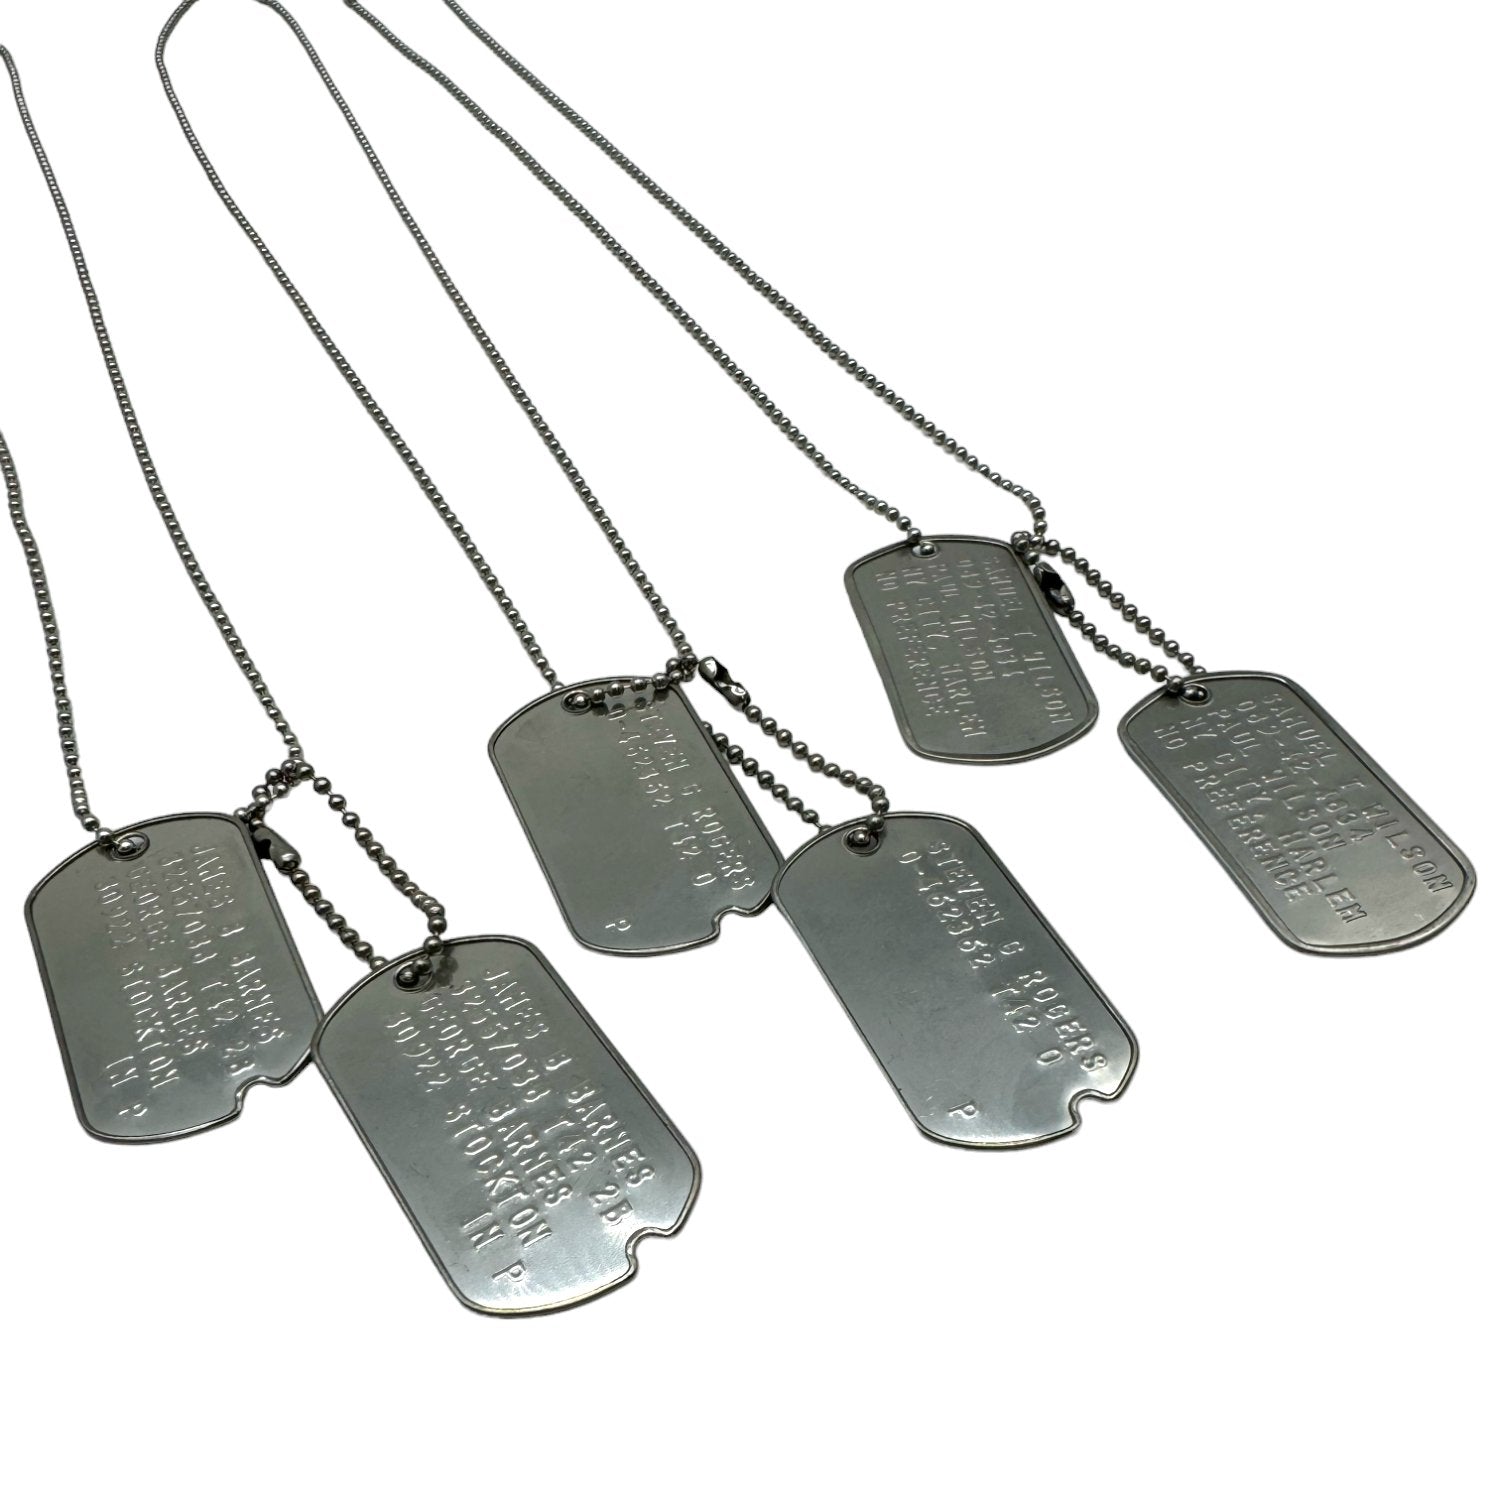 Bucky, Falcon, Captain America (Complete Collection) WWII Style Military Dog Tags Prop Replica - Stainless Steel - Chain&Silencers Included - TheDogTagCo